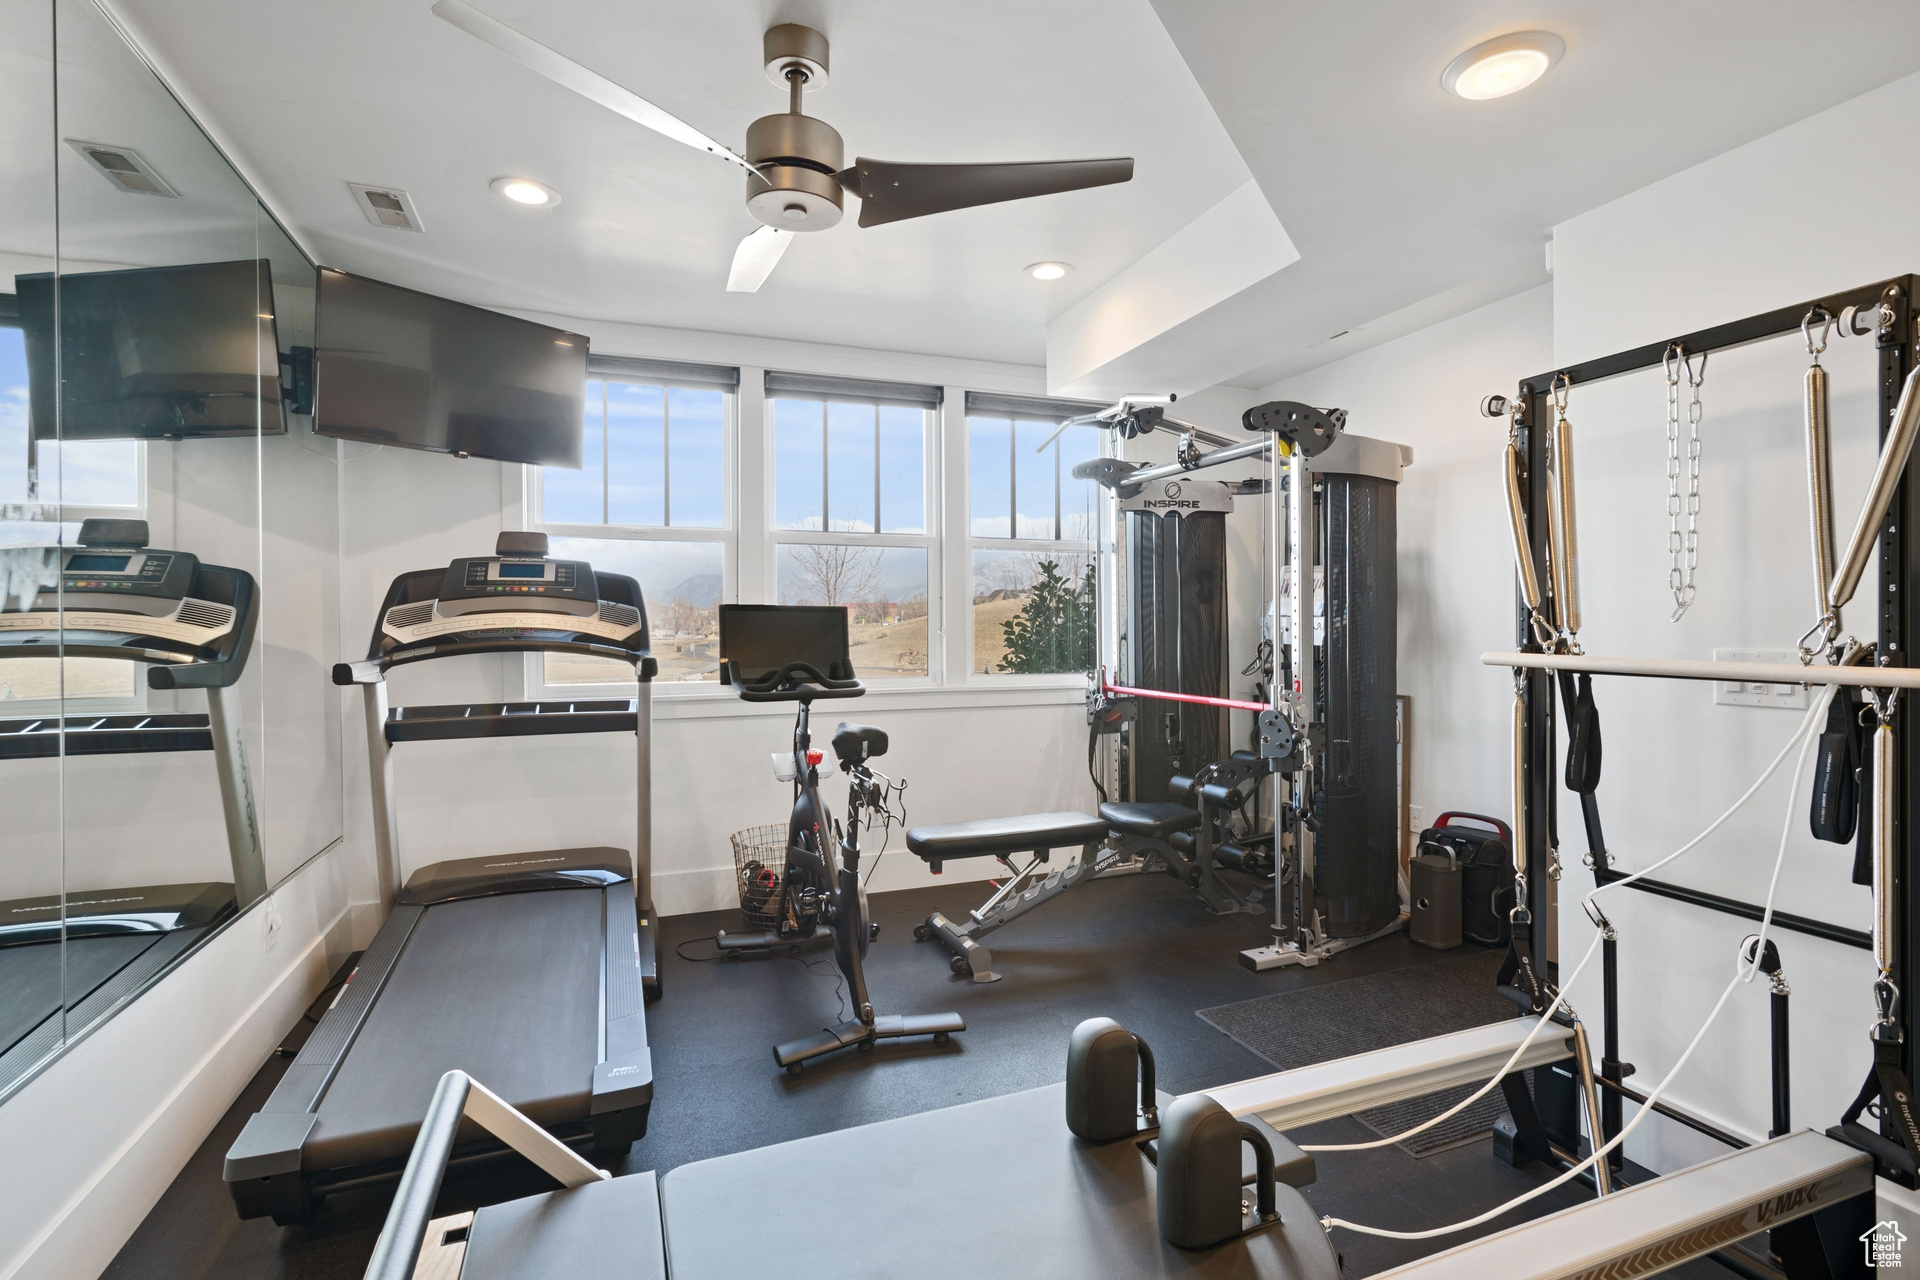 Large workout room with weight equipment, and sauna